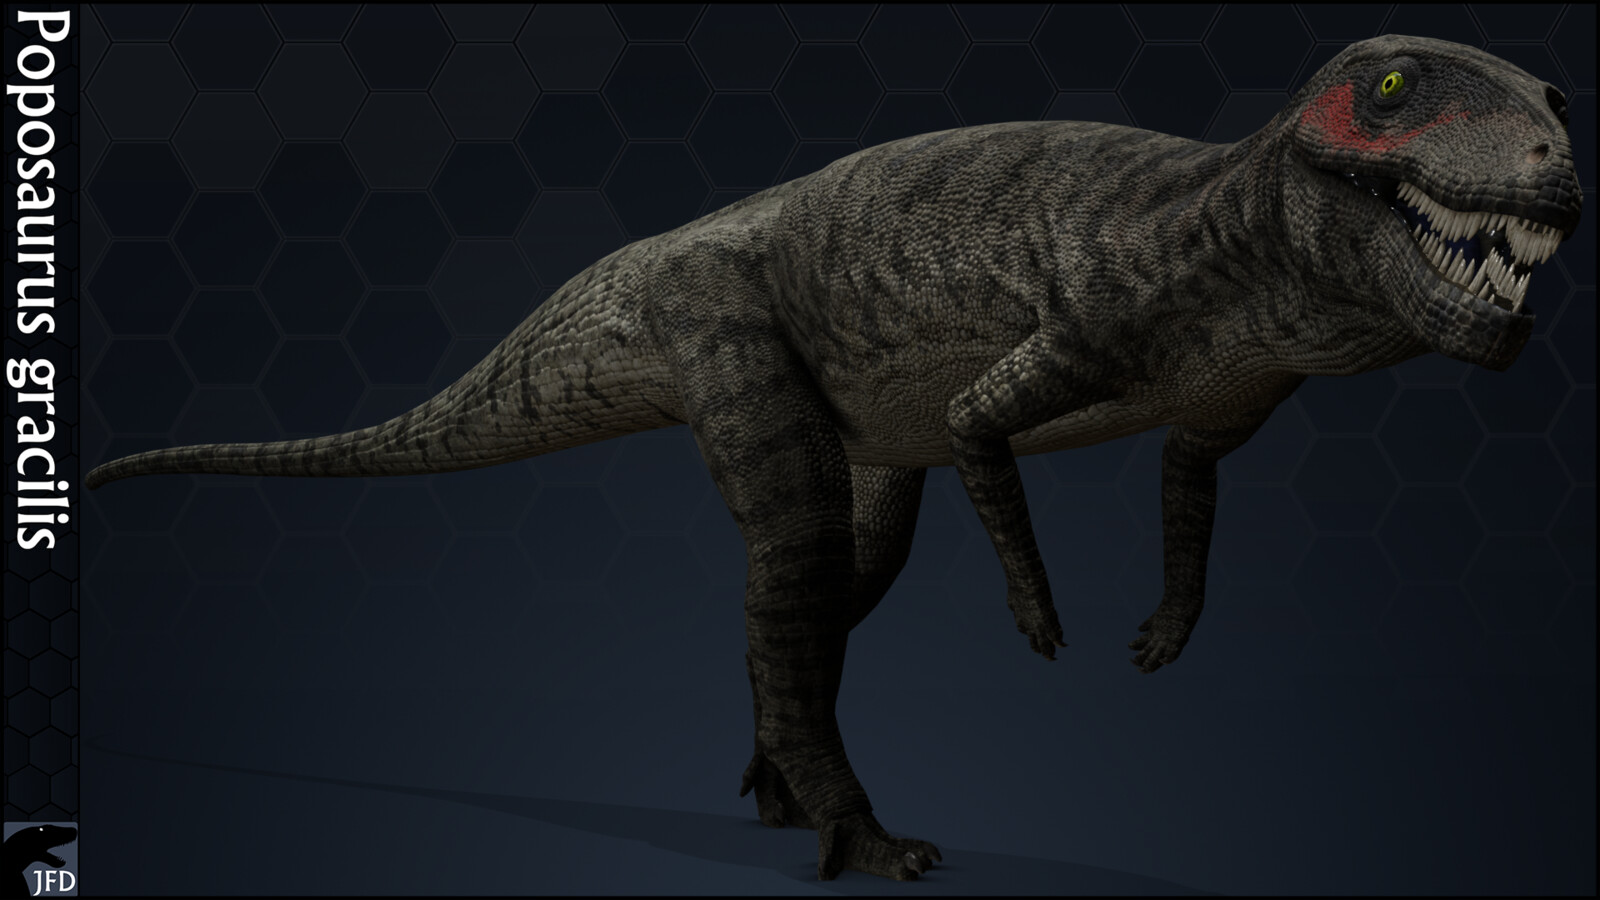 Full body render of the second alternate texture based loosely off of the Kaprosuchus design features in the TV series Primeval.